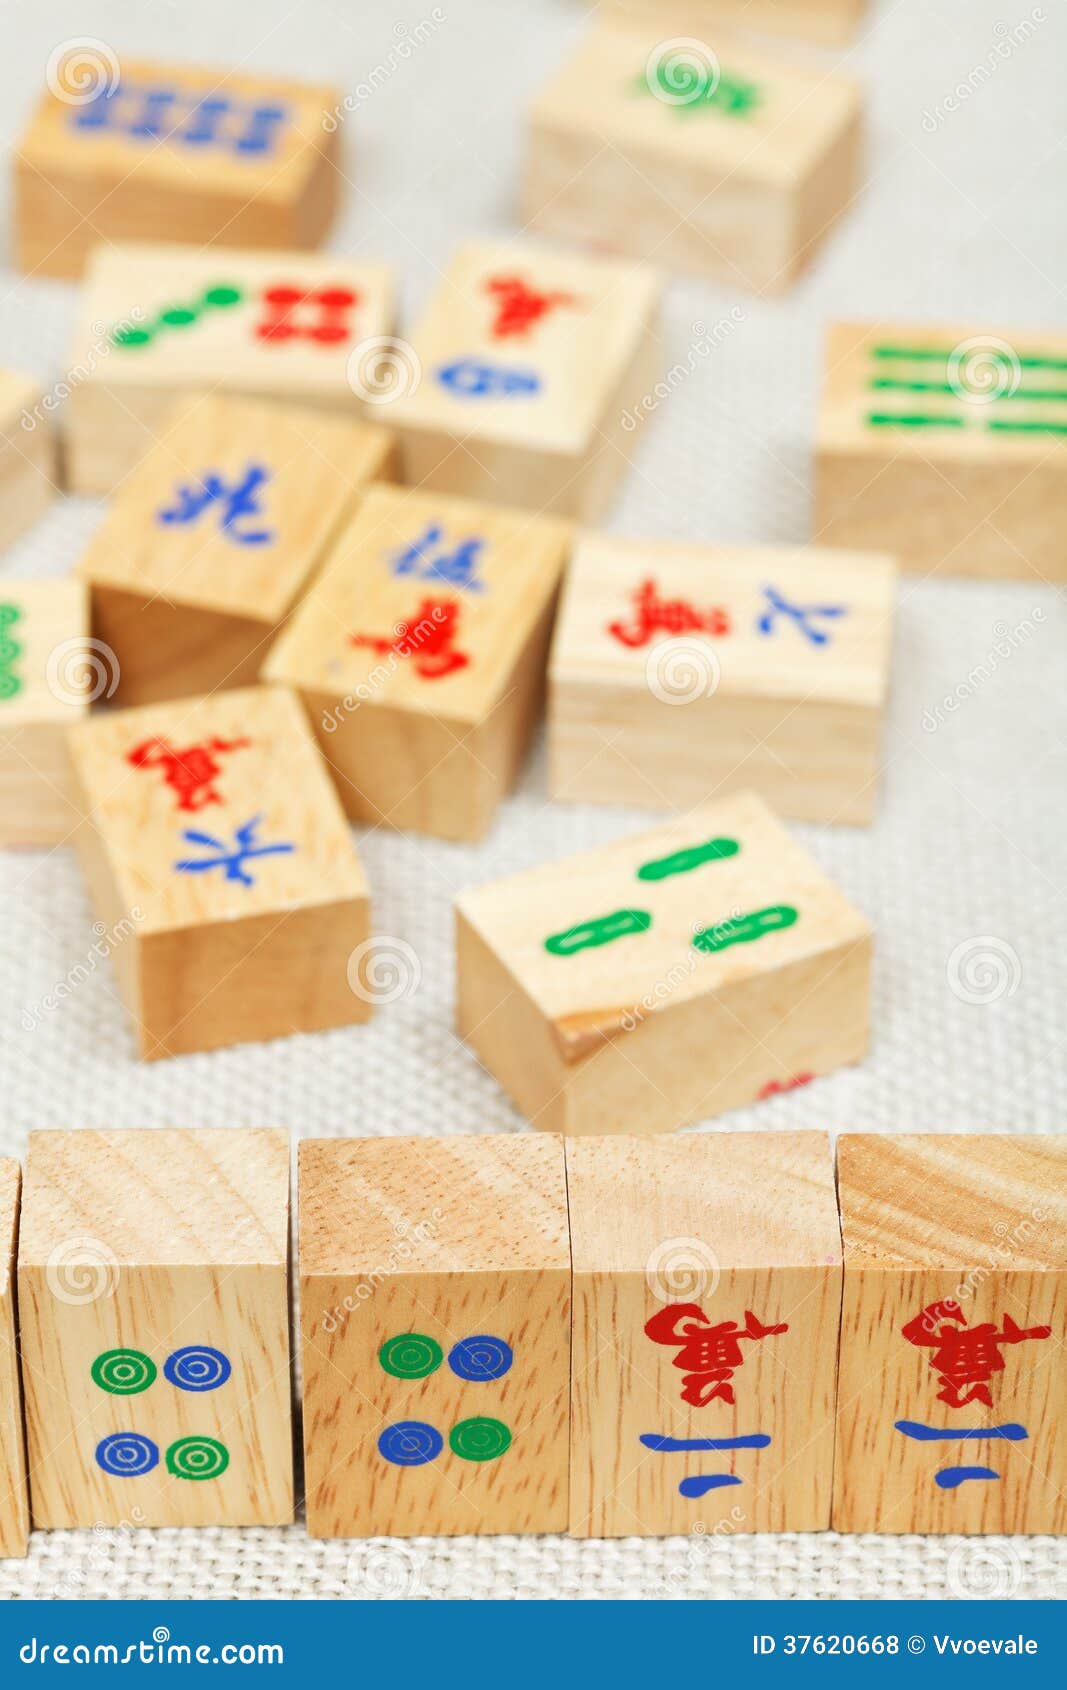 Wood tiles closeup in mahjong game during playing on textile table.